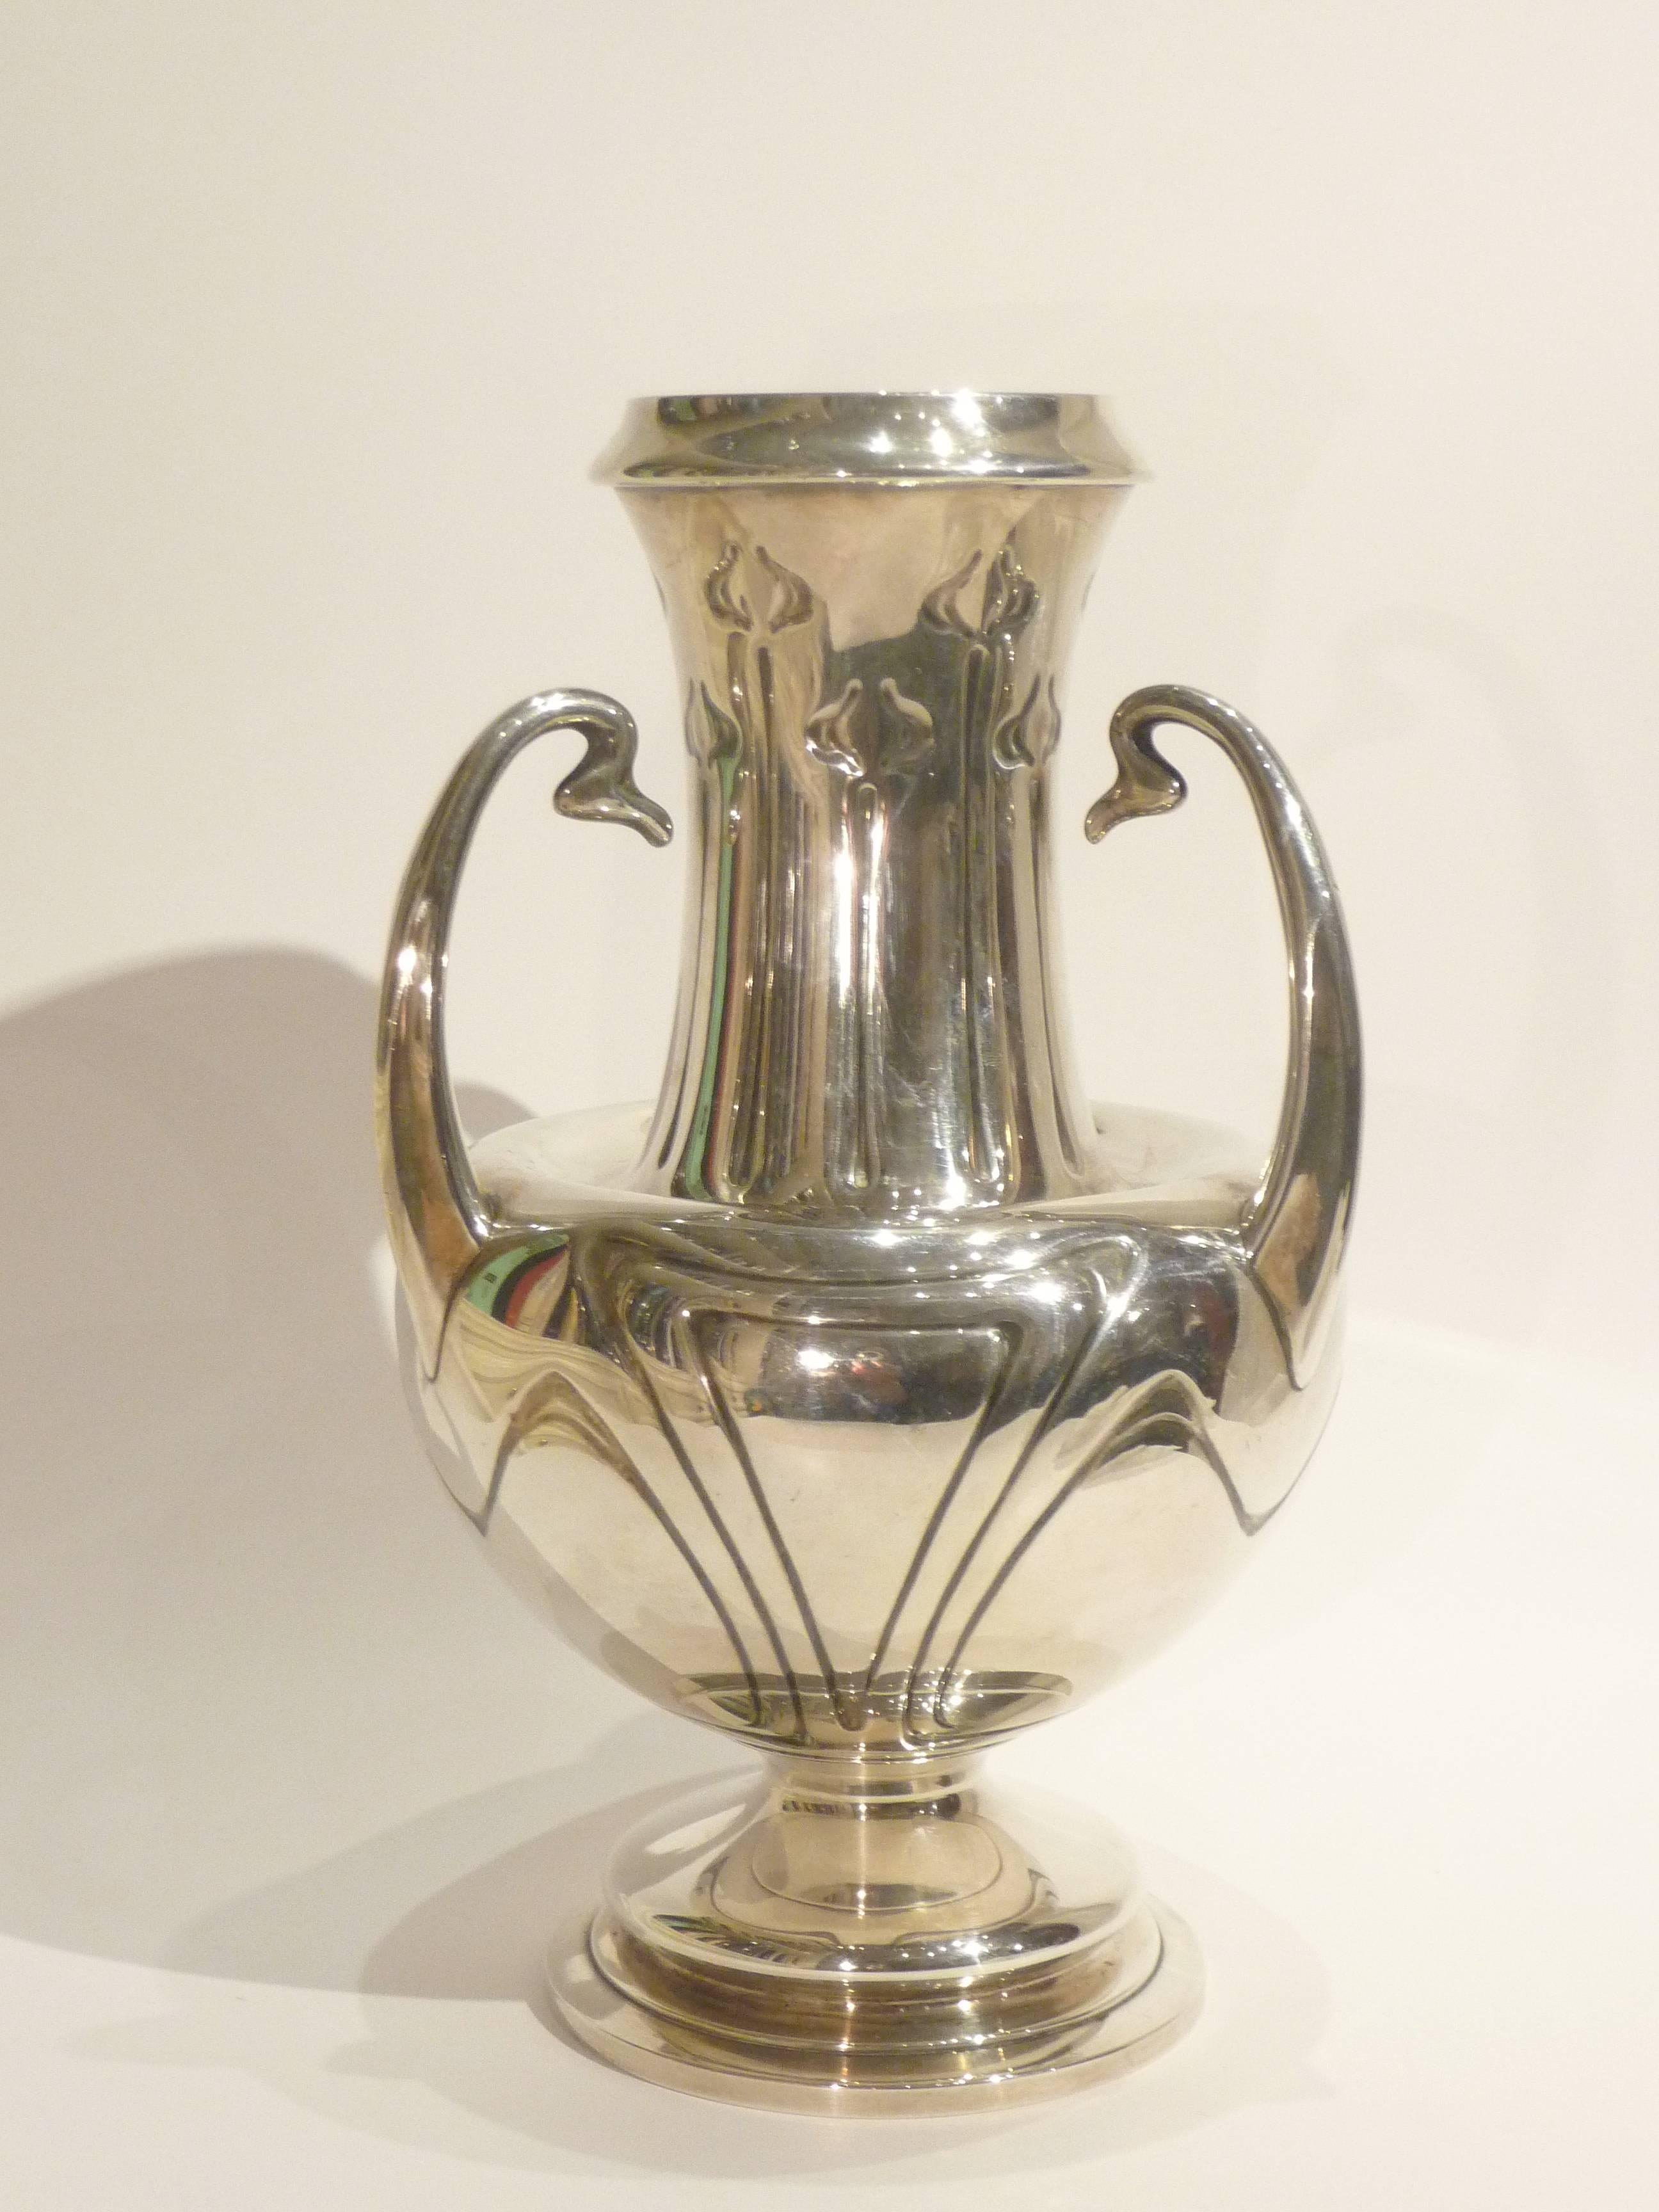 Alphonse Debain.
An Art Nouveau silver vase with a stylized vegetal decor, 
with three handles.
Signed Debain, with maker's mark.
Exhibition: Exposition universelle, Paris, 1900.
 